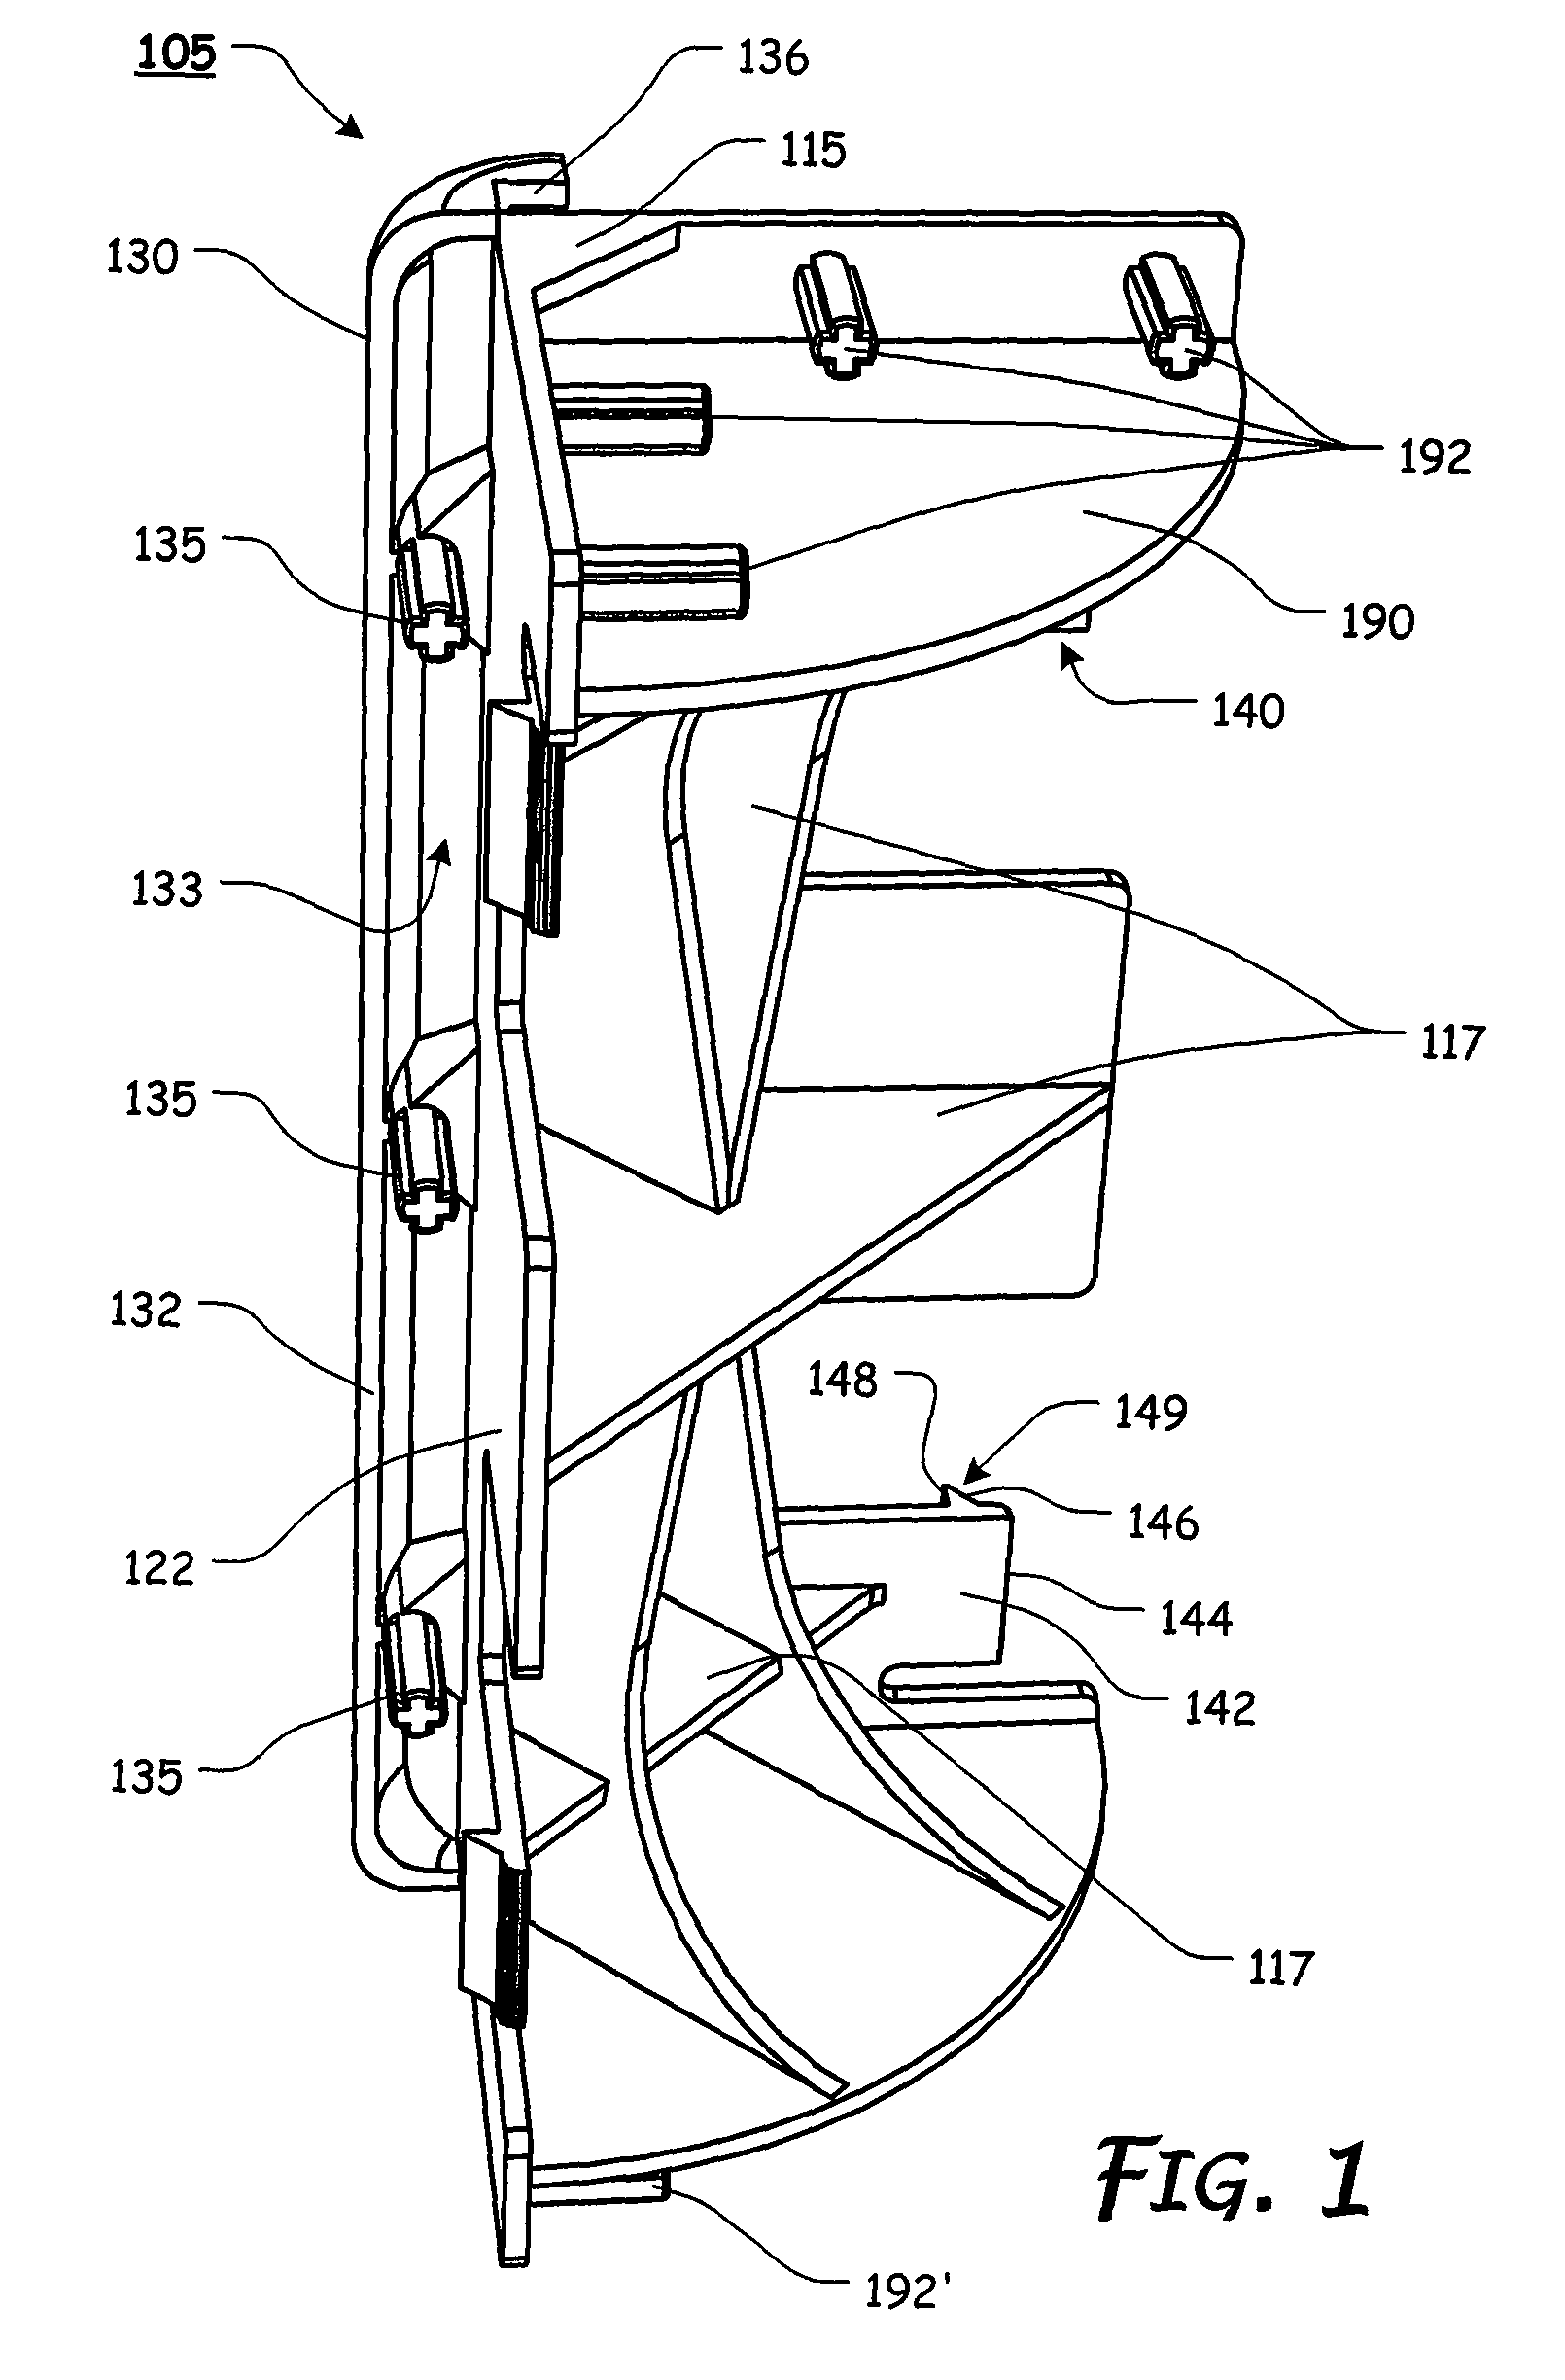 Connector element with tang fixation and associated frame assembly with support slats